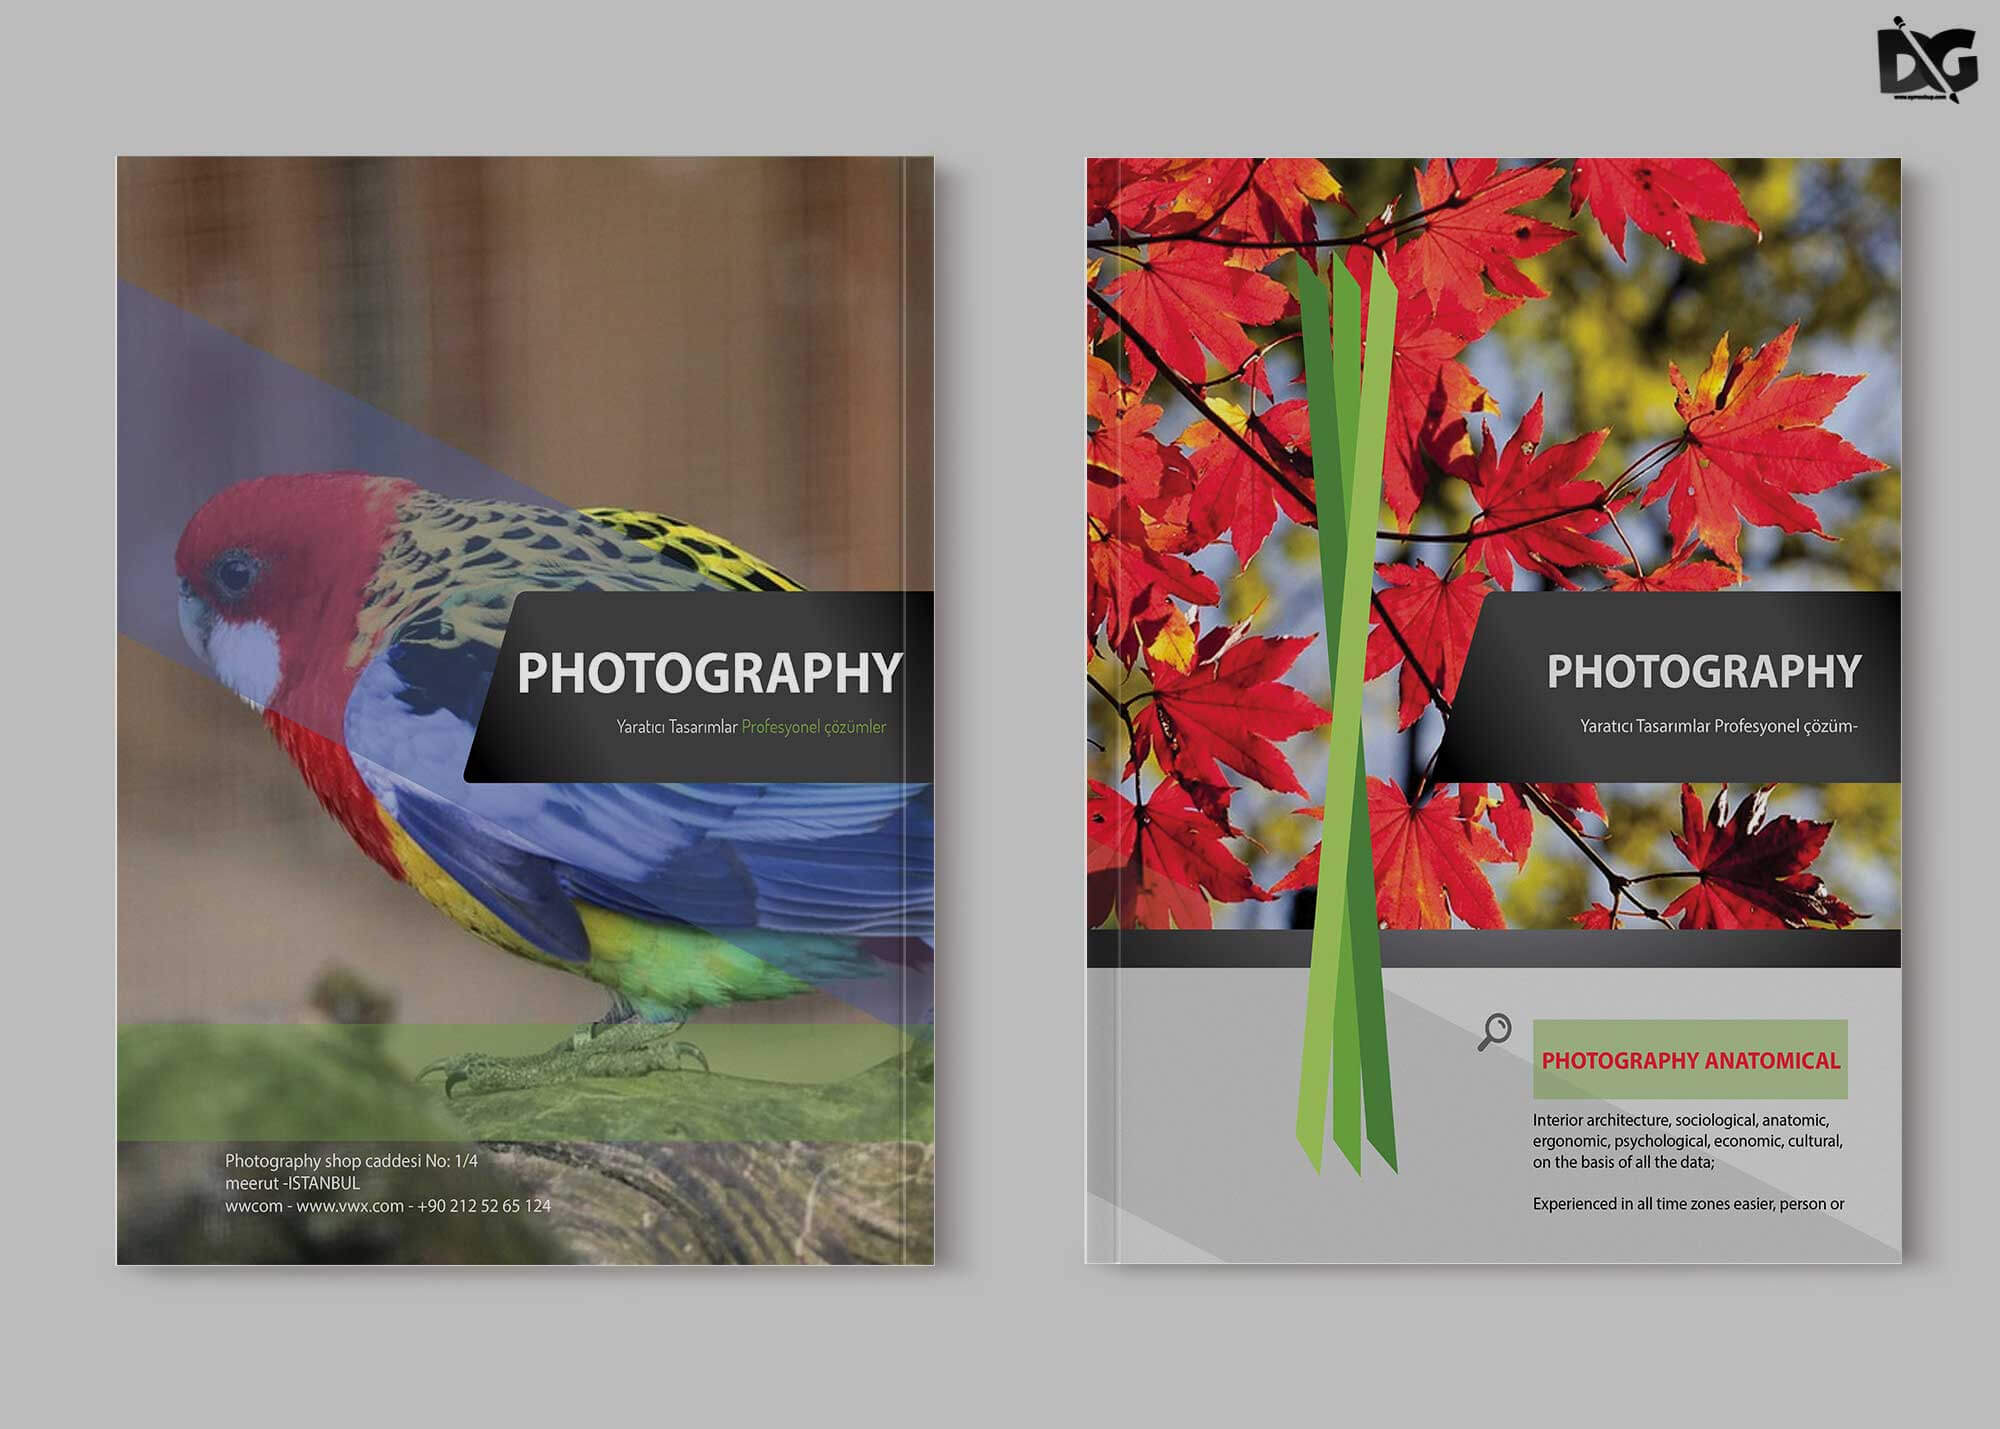 Free Zoo Photography Psd Brochure Template | Free Psd Mockup Intended For Zoo Brochure Template